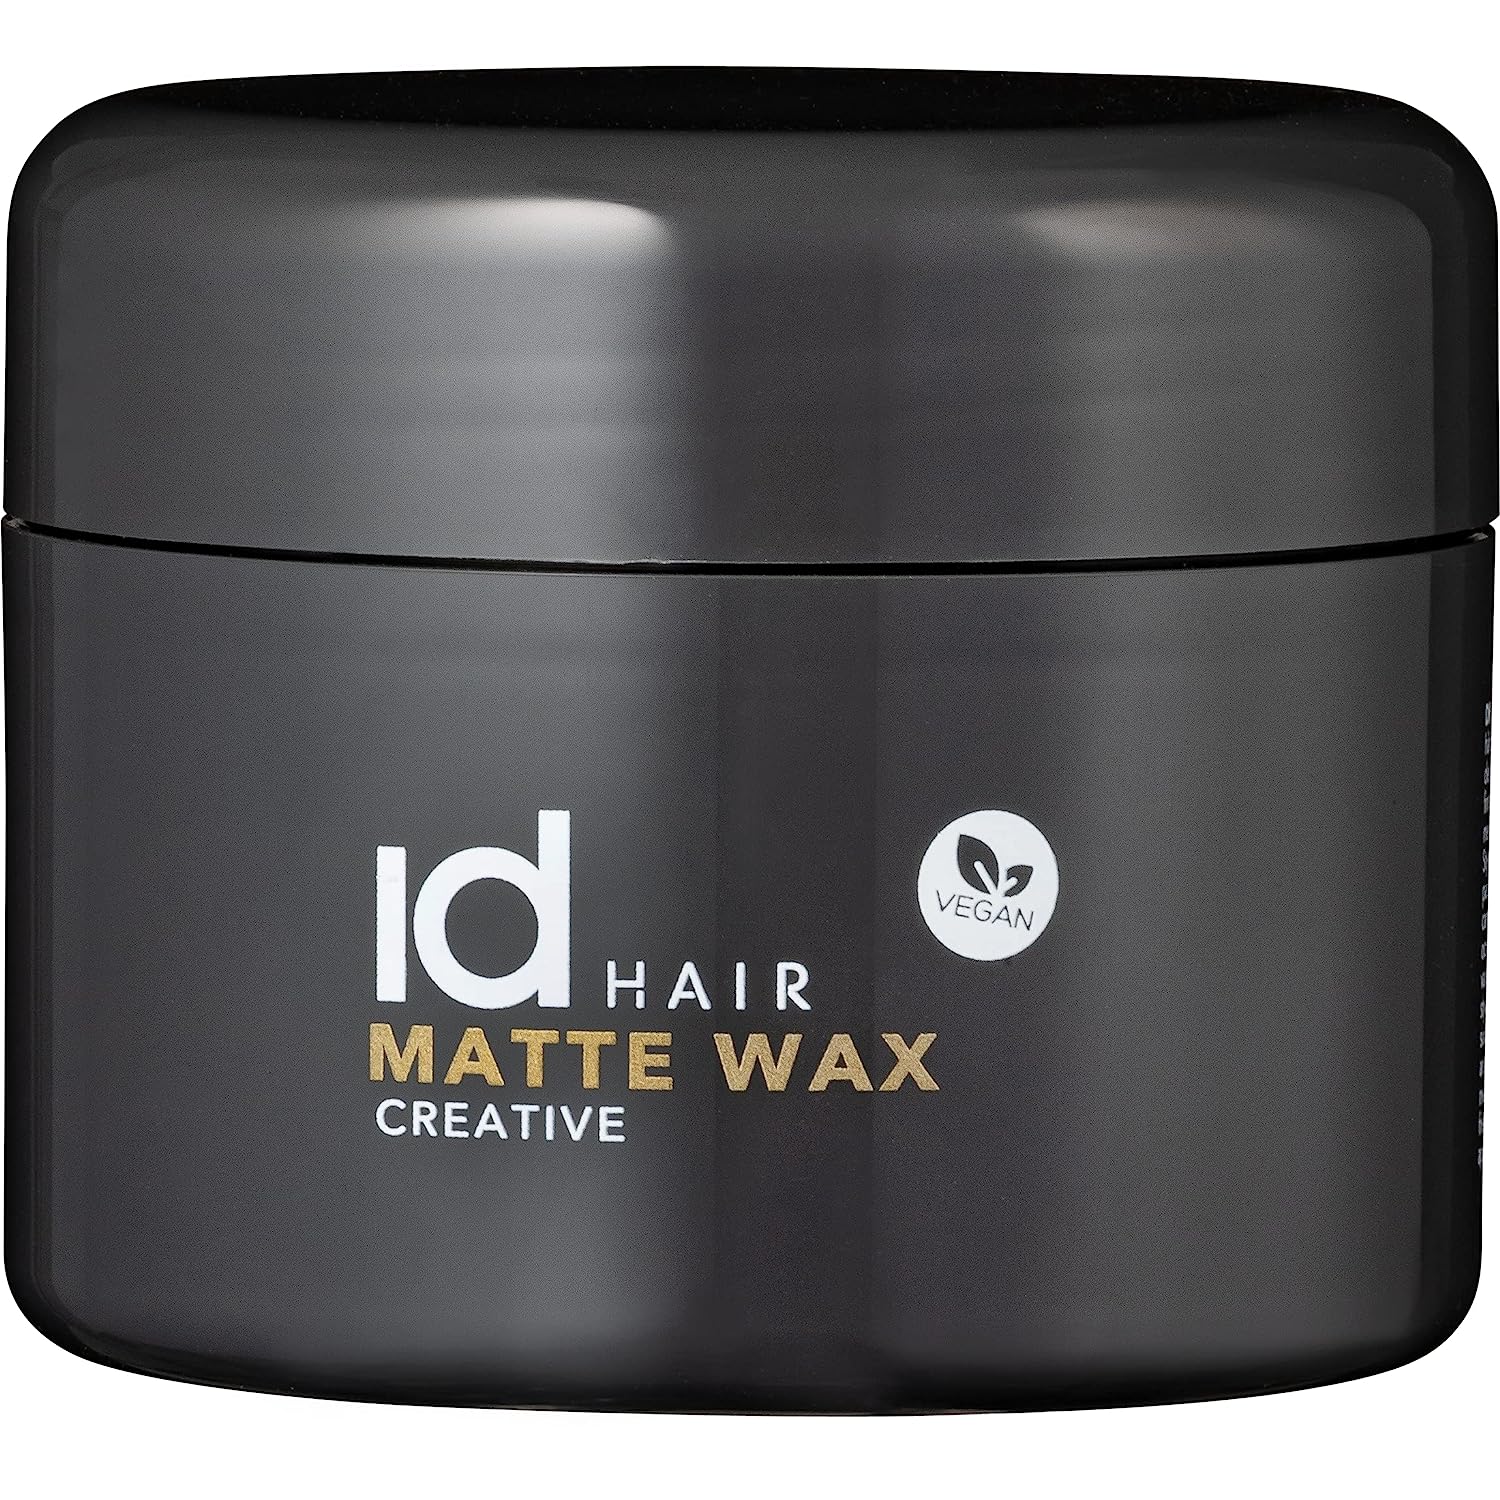 ID Hair - Matte Wax - Matte Finish - Suitable for Short to Medium Hair - 85ml (Pack of 1)